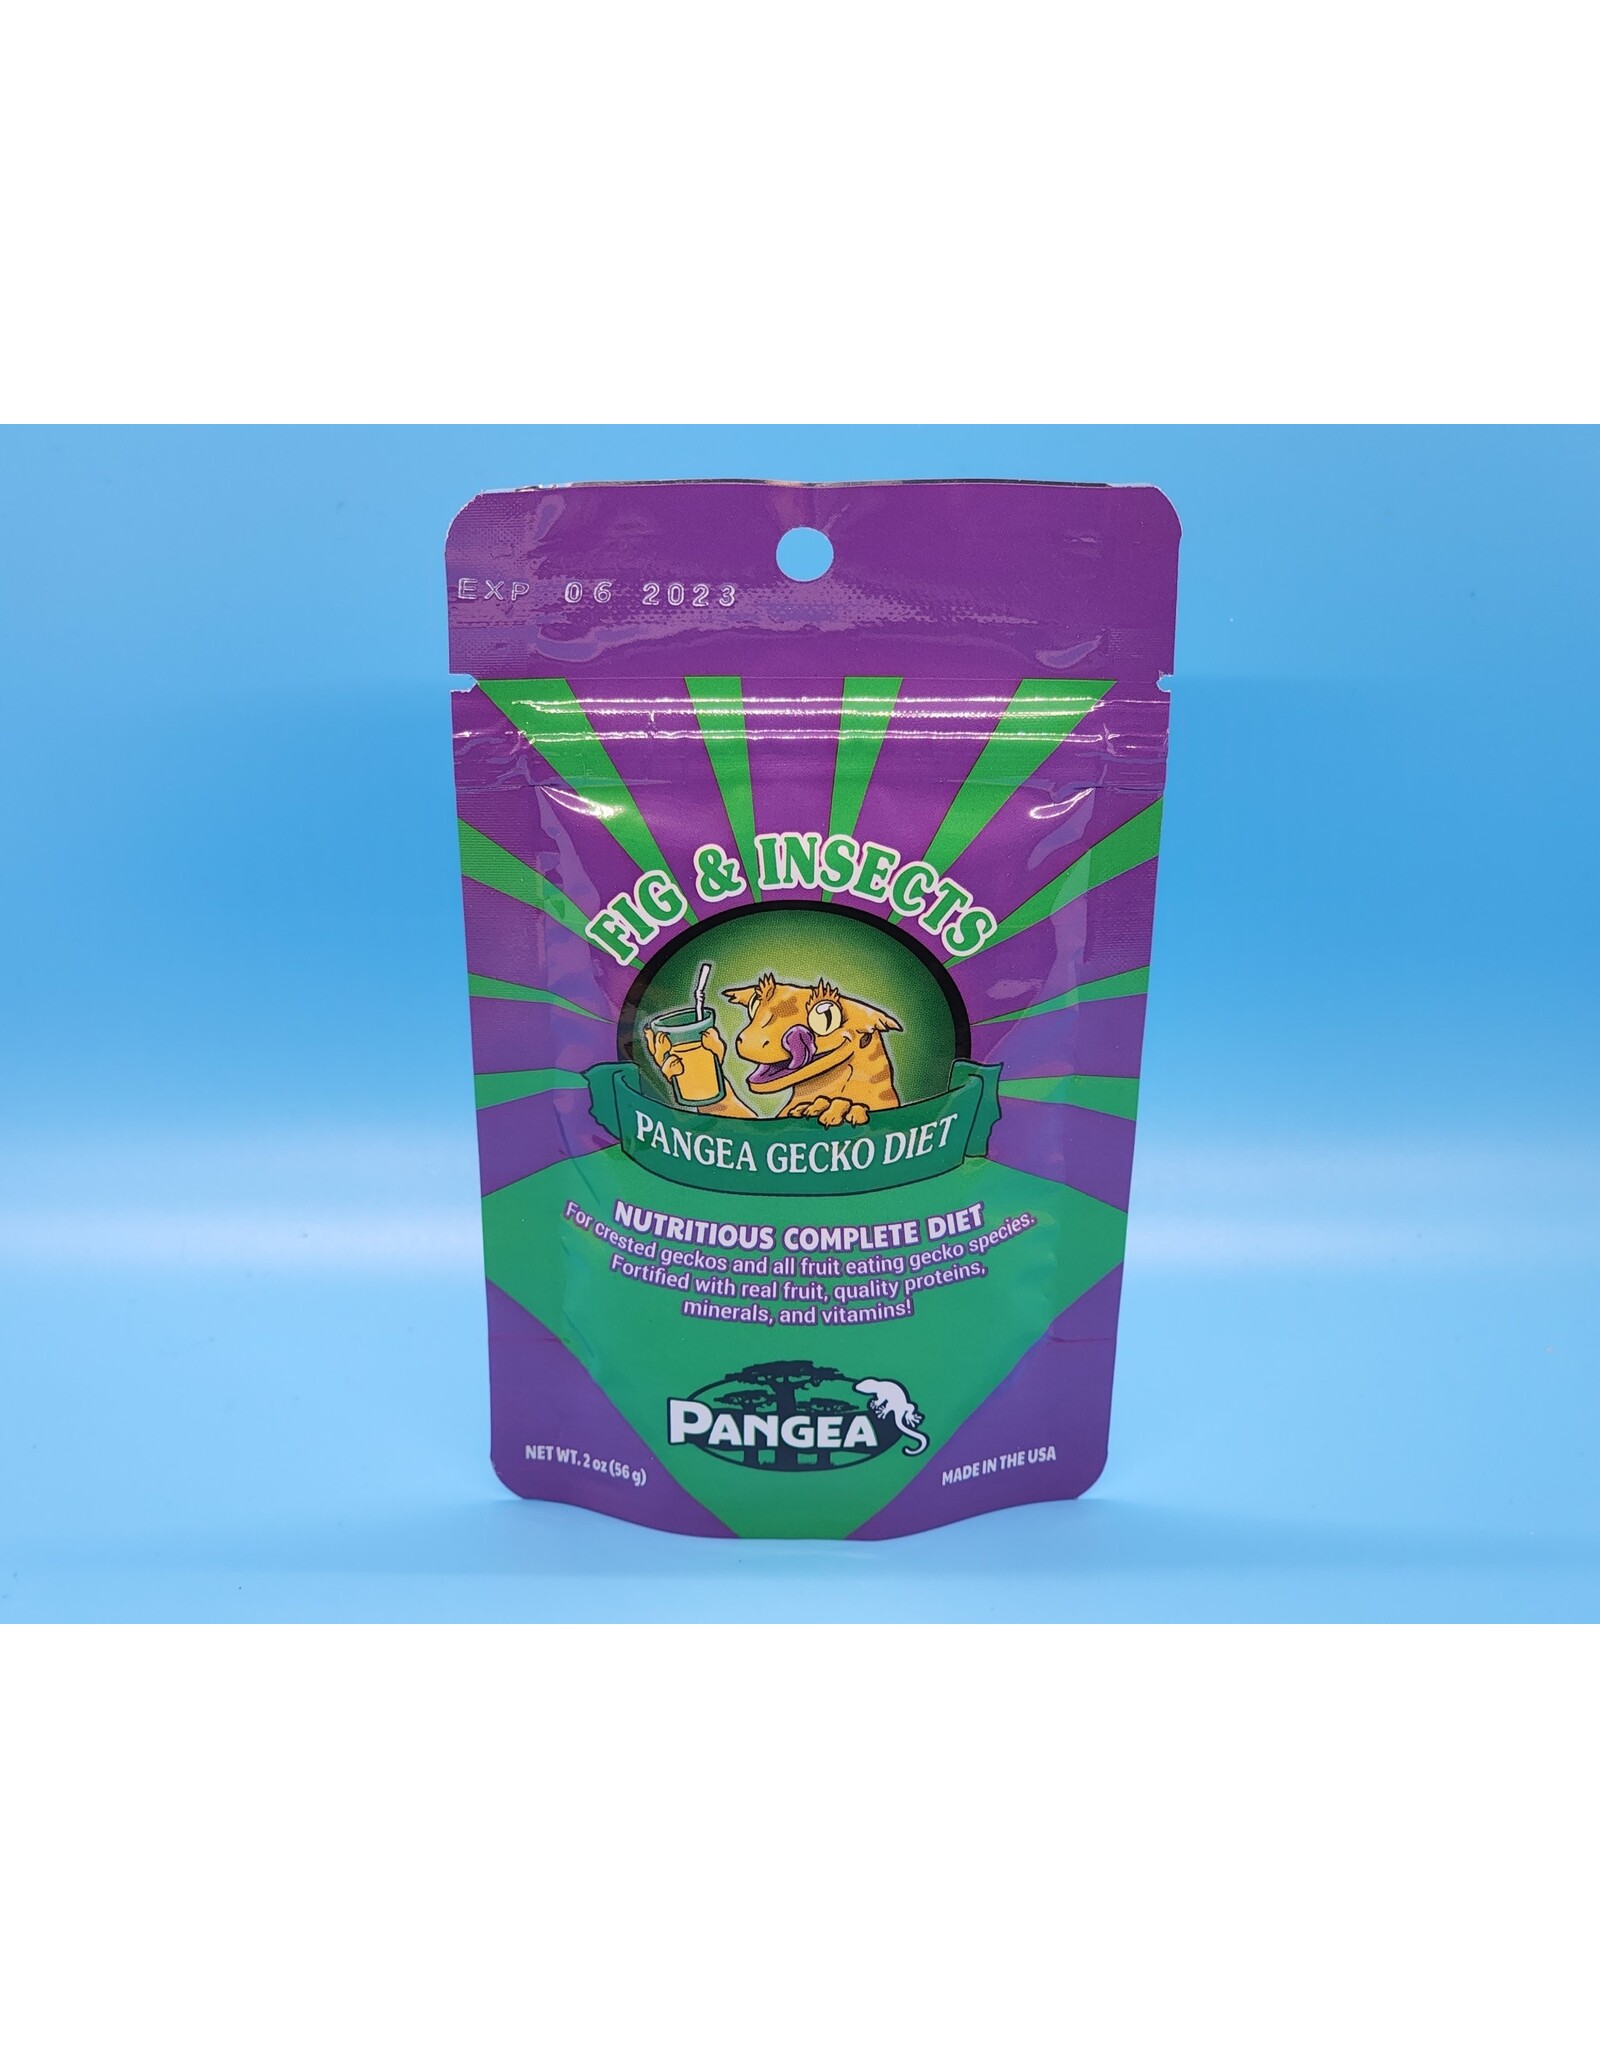 Pangea Pangea Gecko Diet Fig & Insects 2oz